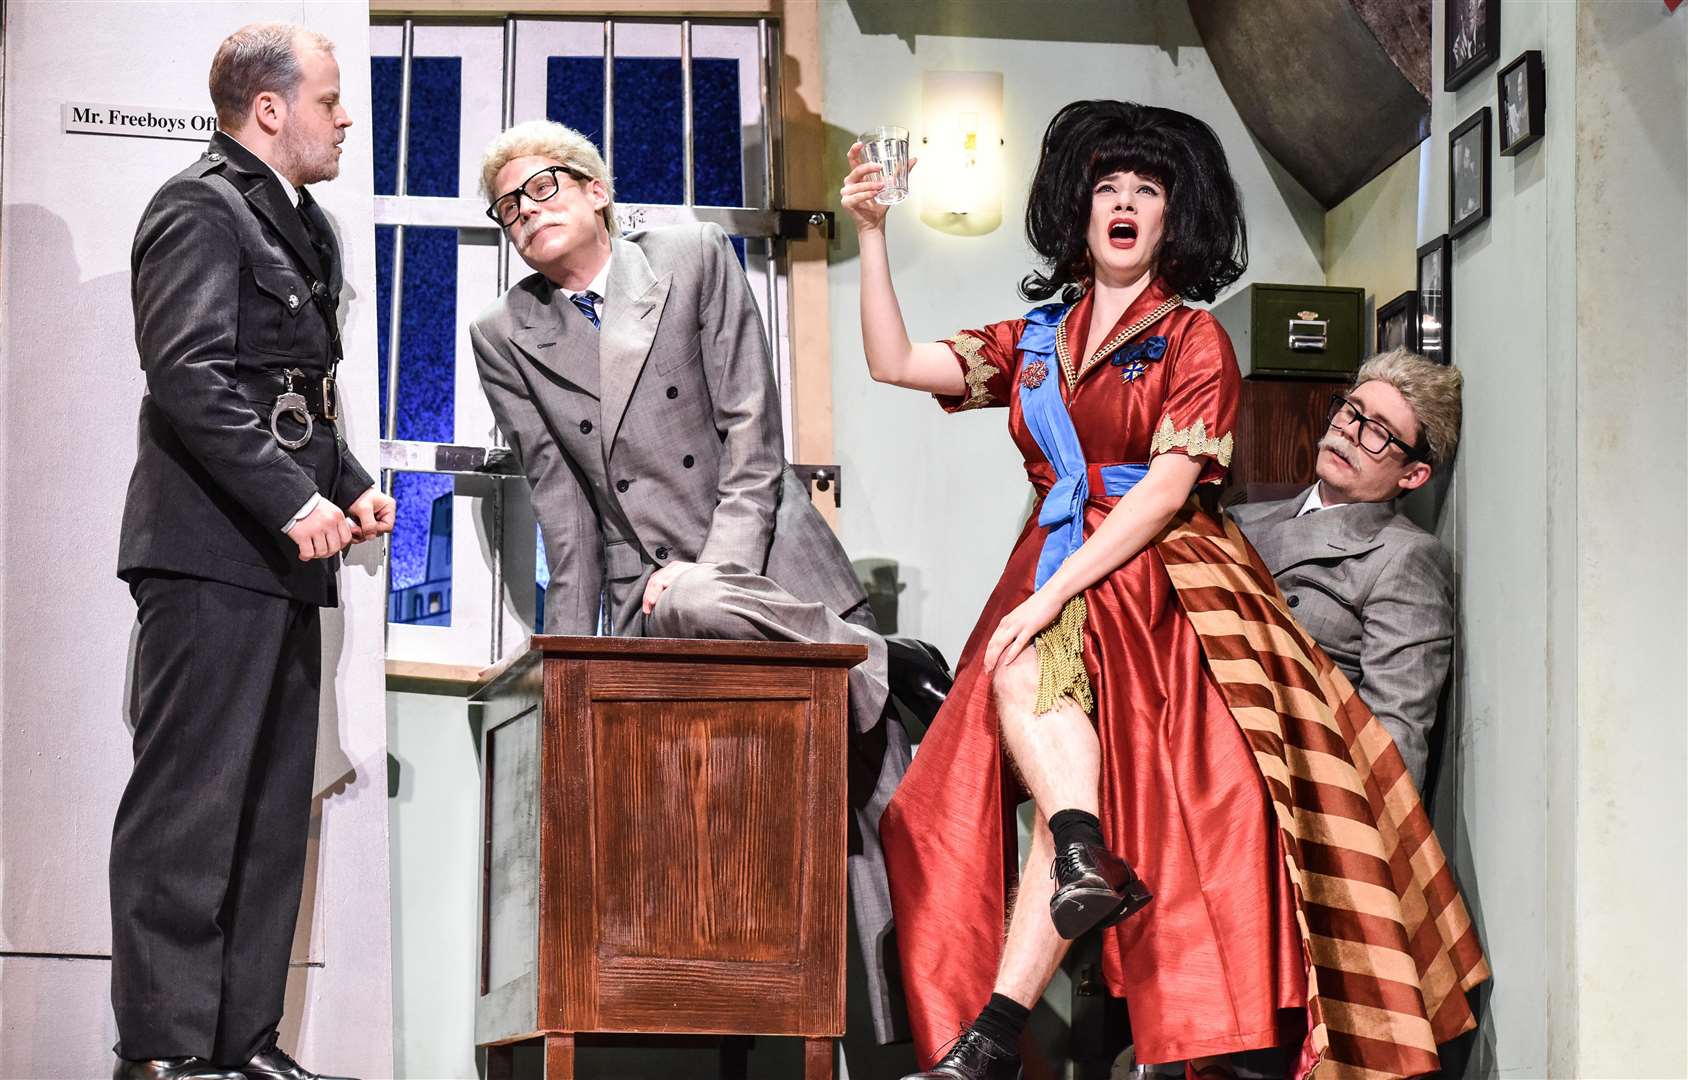 The Comedy About a Bank Robbery will be at the Marlowe Theatre